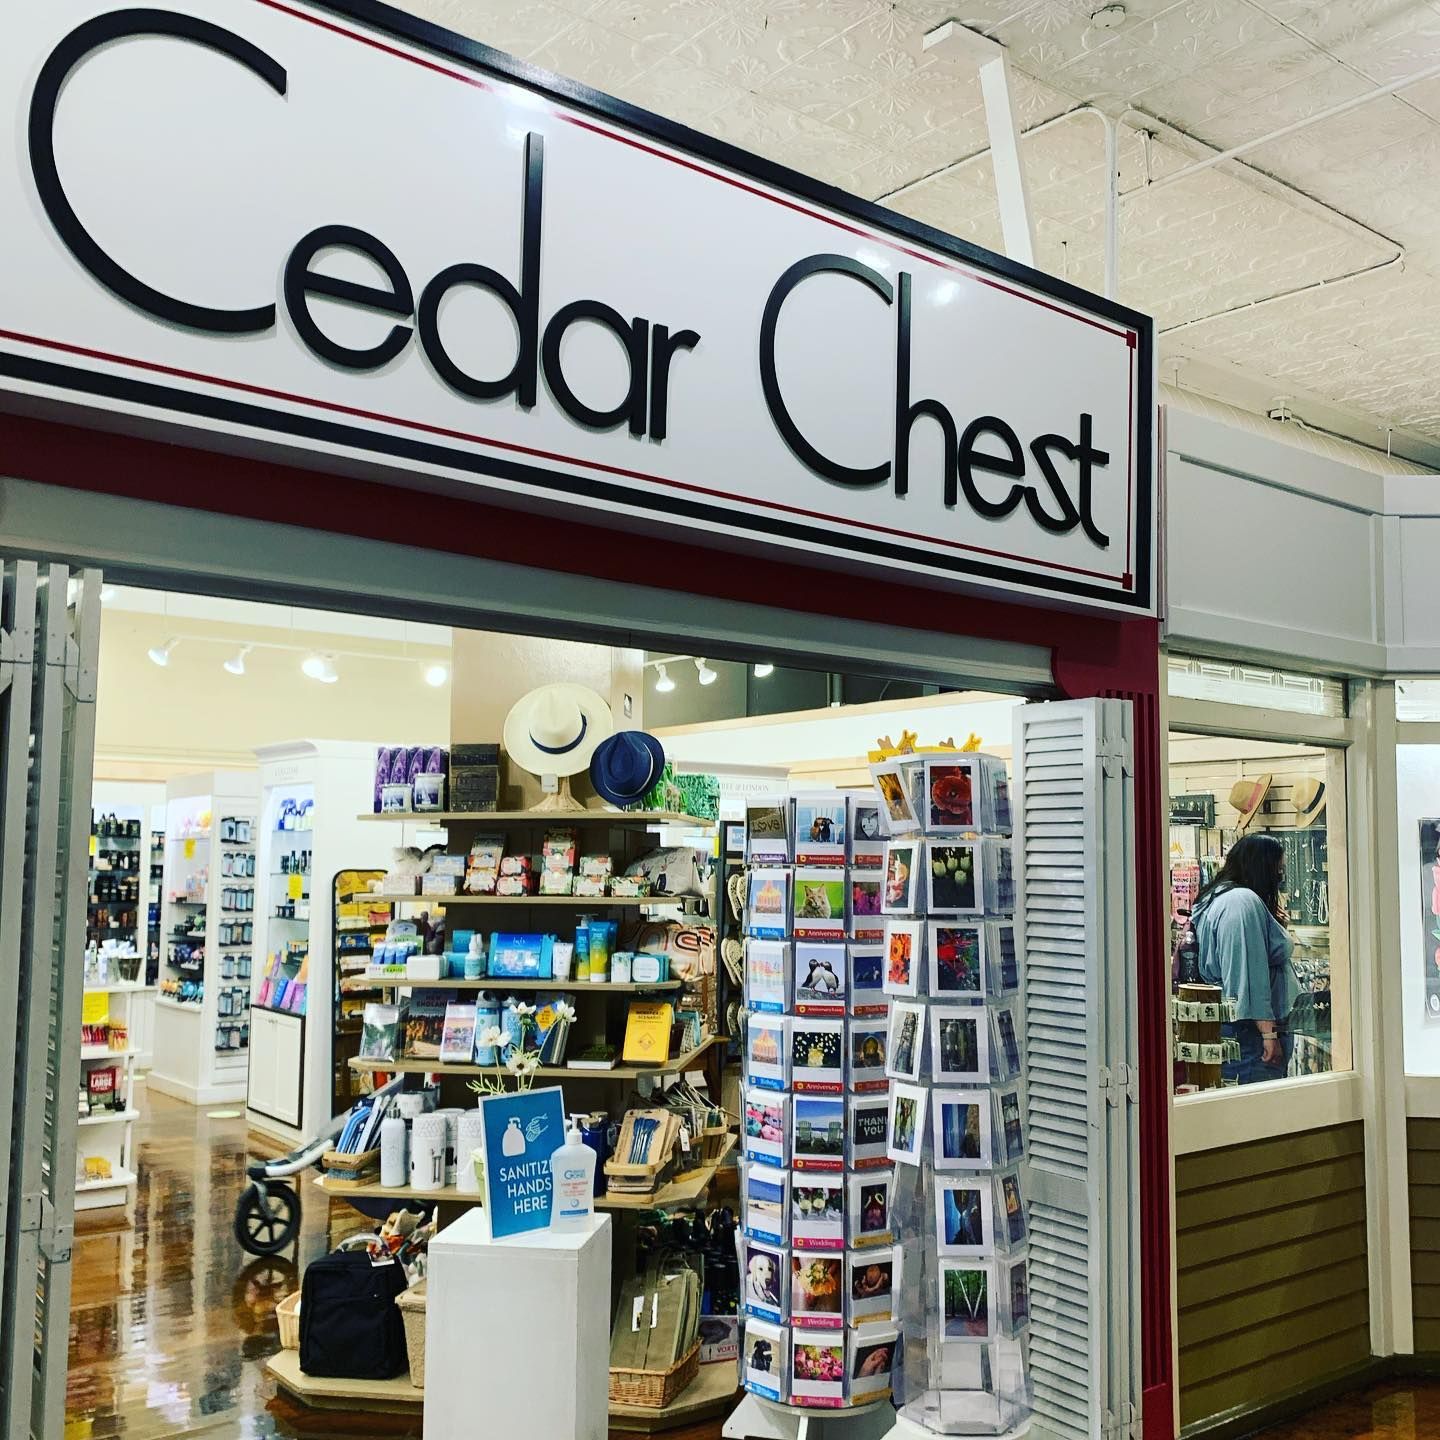 Cedar Chest has everything from soaps to clothing to accessories! Shop this delightful spot in Thornes Marketplace Northampton MA.